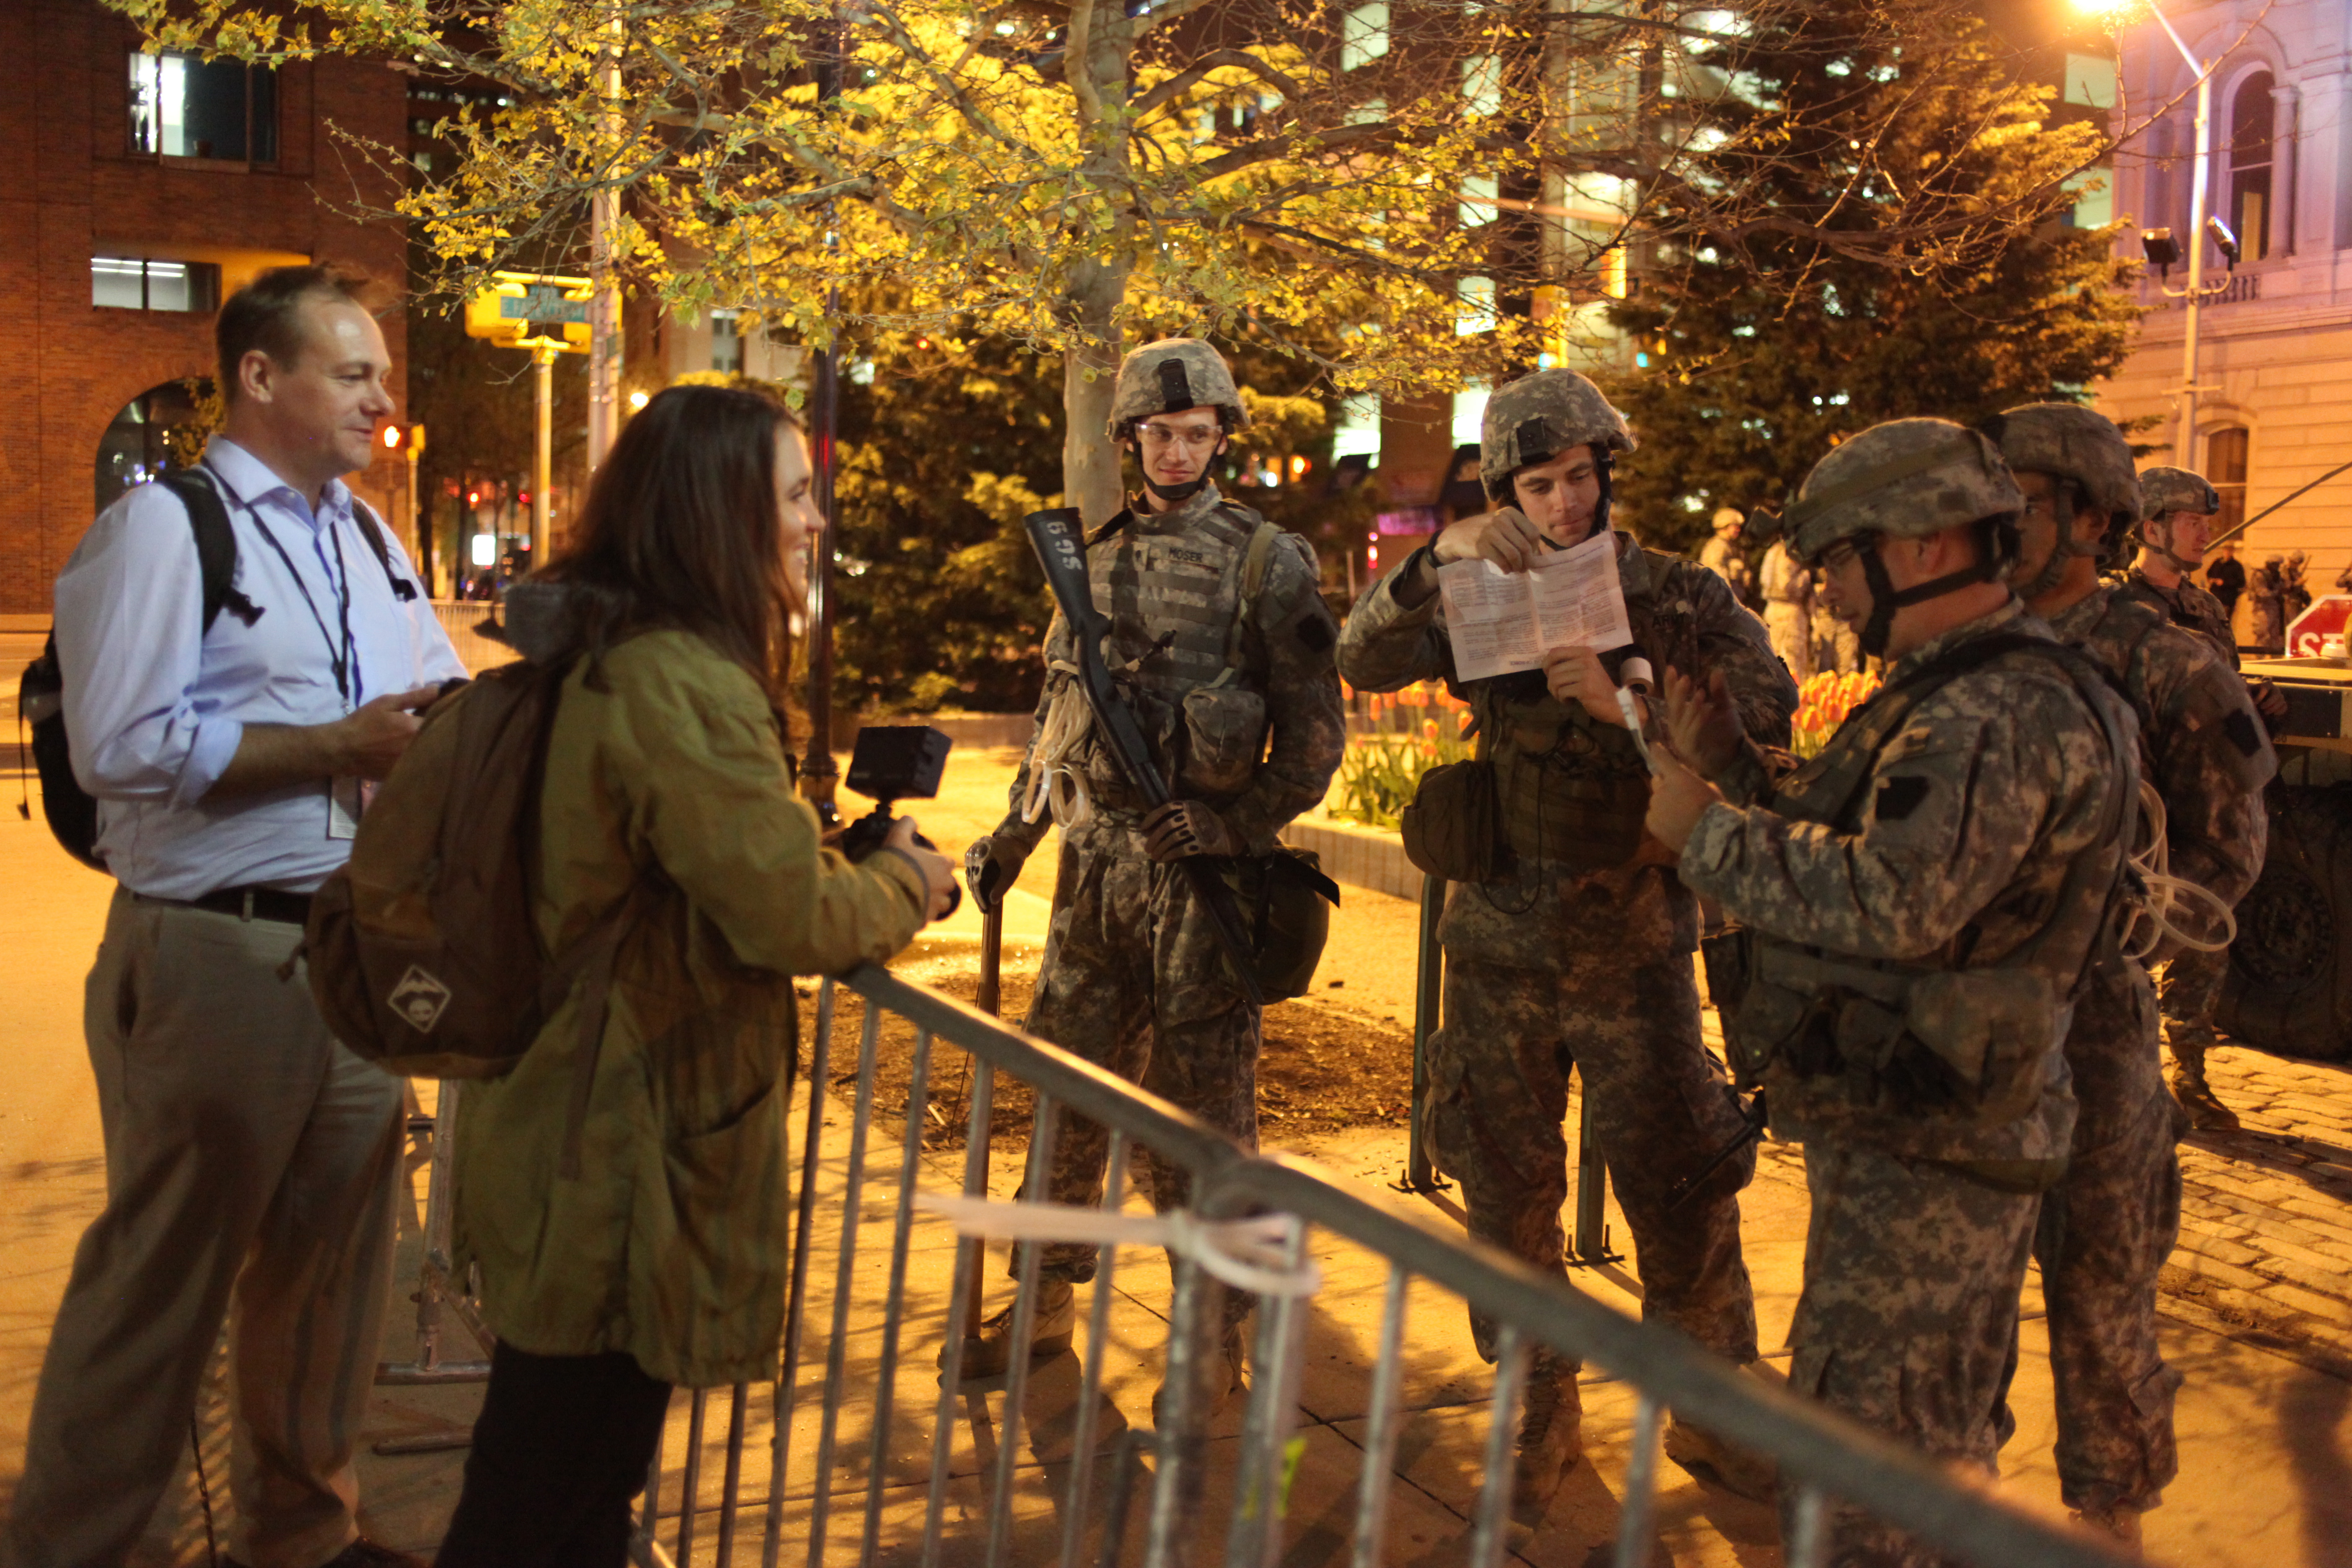 Medill National Security Specialization students Matthew Schehl and Jenny Leonard speak with Maryland Army National Guard soldiers in front of Baltimore City Hall on April 30, 2015. (Jennifer-Leigh Oprihory)